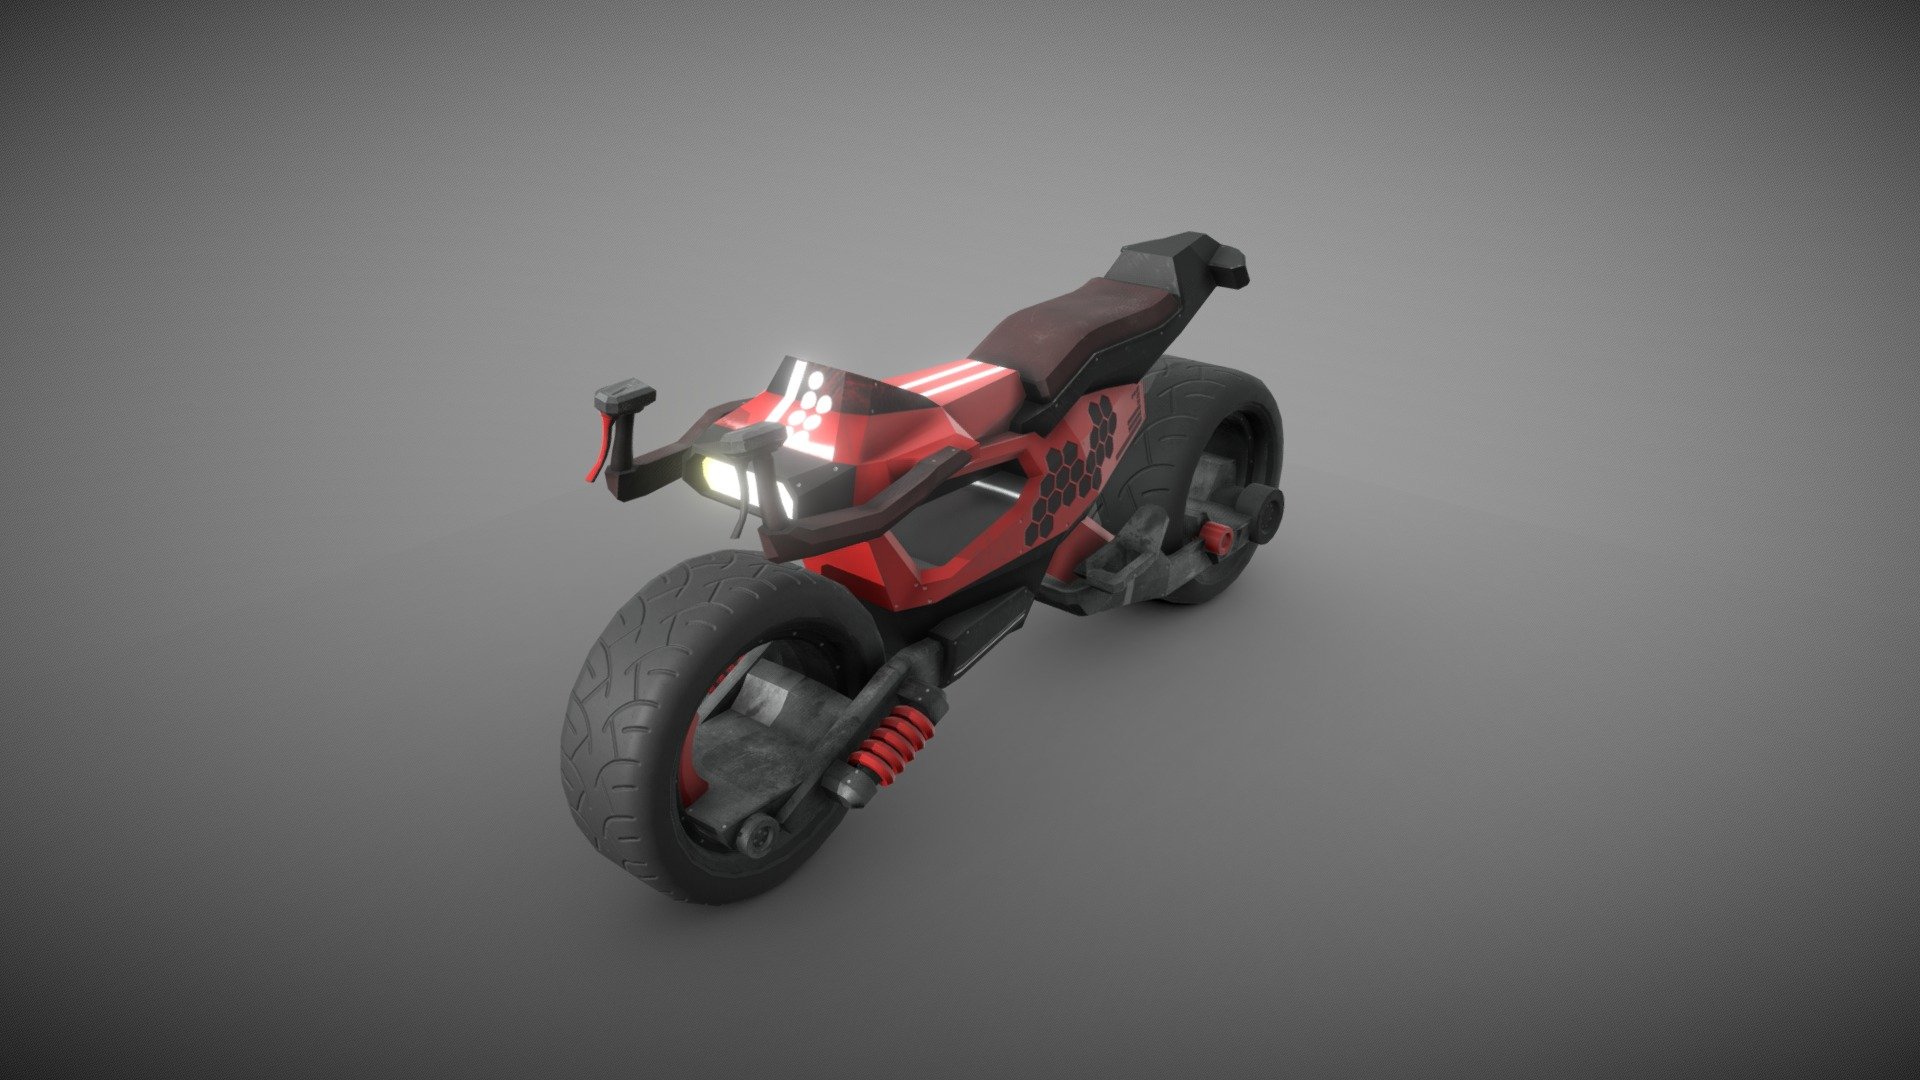 Introducing the Cyberpunk Moto GameReady model, a futuristic motorcycle with sleek and edgy design inspired by the cyberpunk genre. This highly-detailed model comes with high-quality textures, realistic animations, and customizable parts such as wheels and handlebars that can be easily manipulated in your game engine of choice.

Perfect for any sci-fi or cyberpunk themed game, this model is optimized for performance and is ready to use in a variety of game engines. With its attention to detail and immersive design, the Cyberpunk Moto GameReady model is sure to enhance any virtual world it is added to 3d model